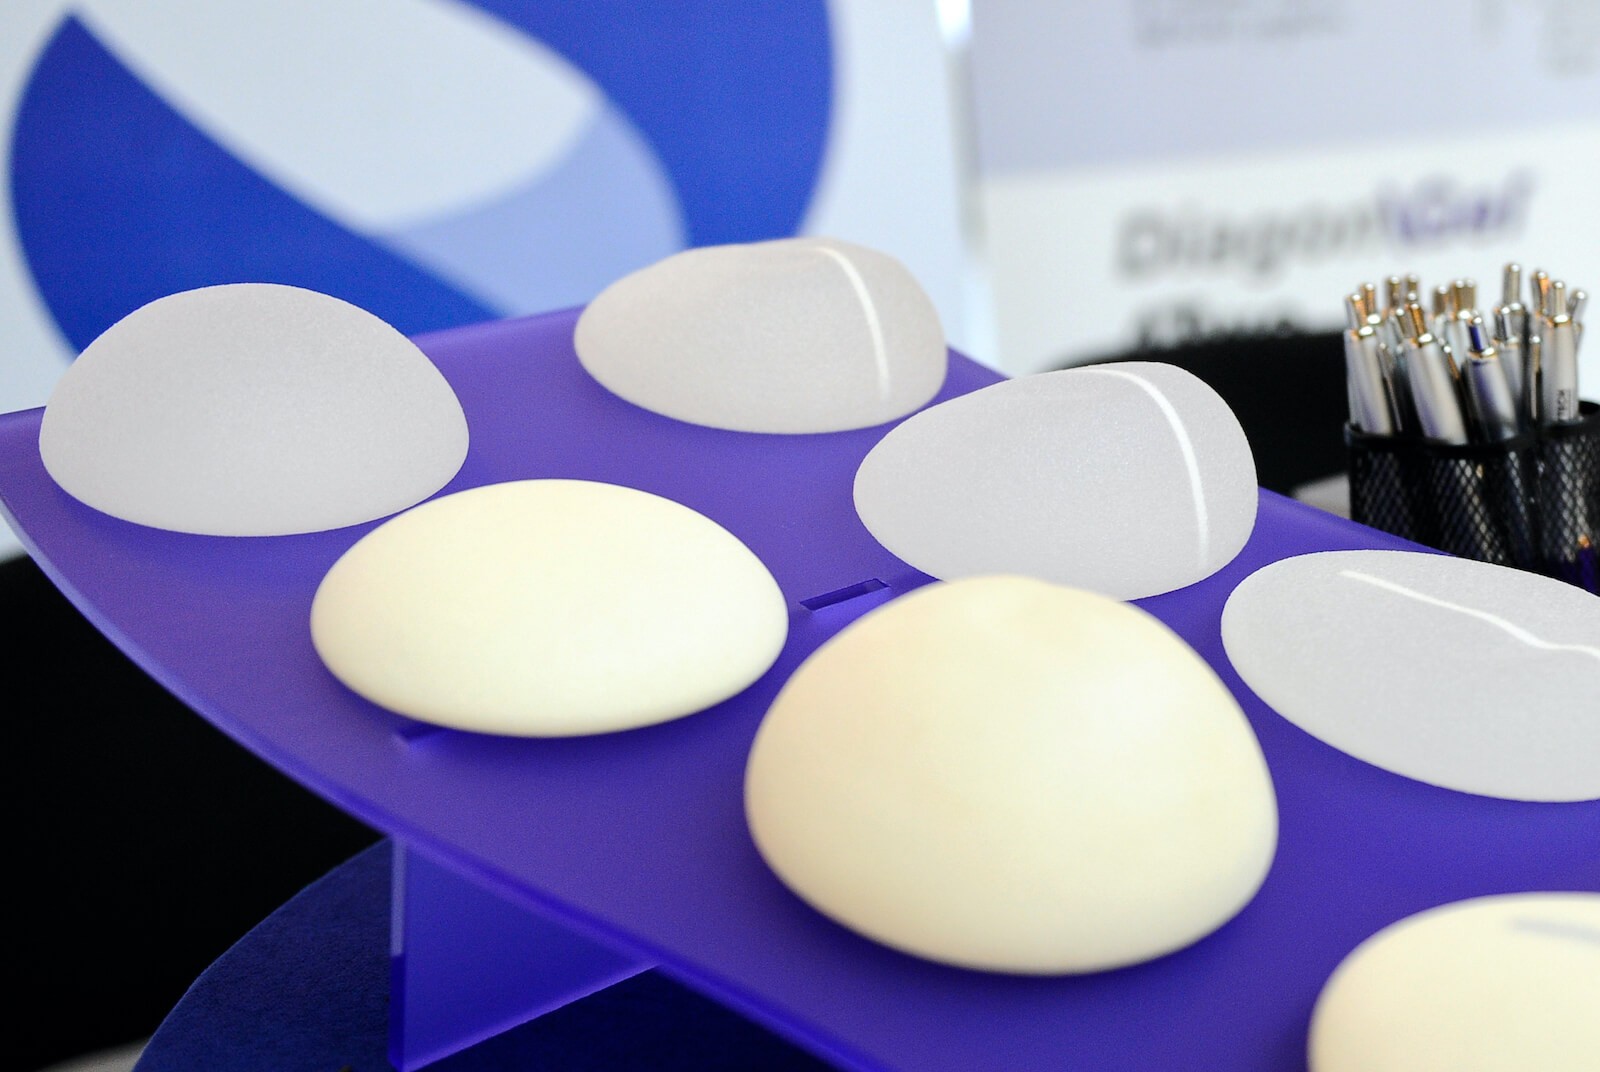 8 Breast Implants of Varying Sizes